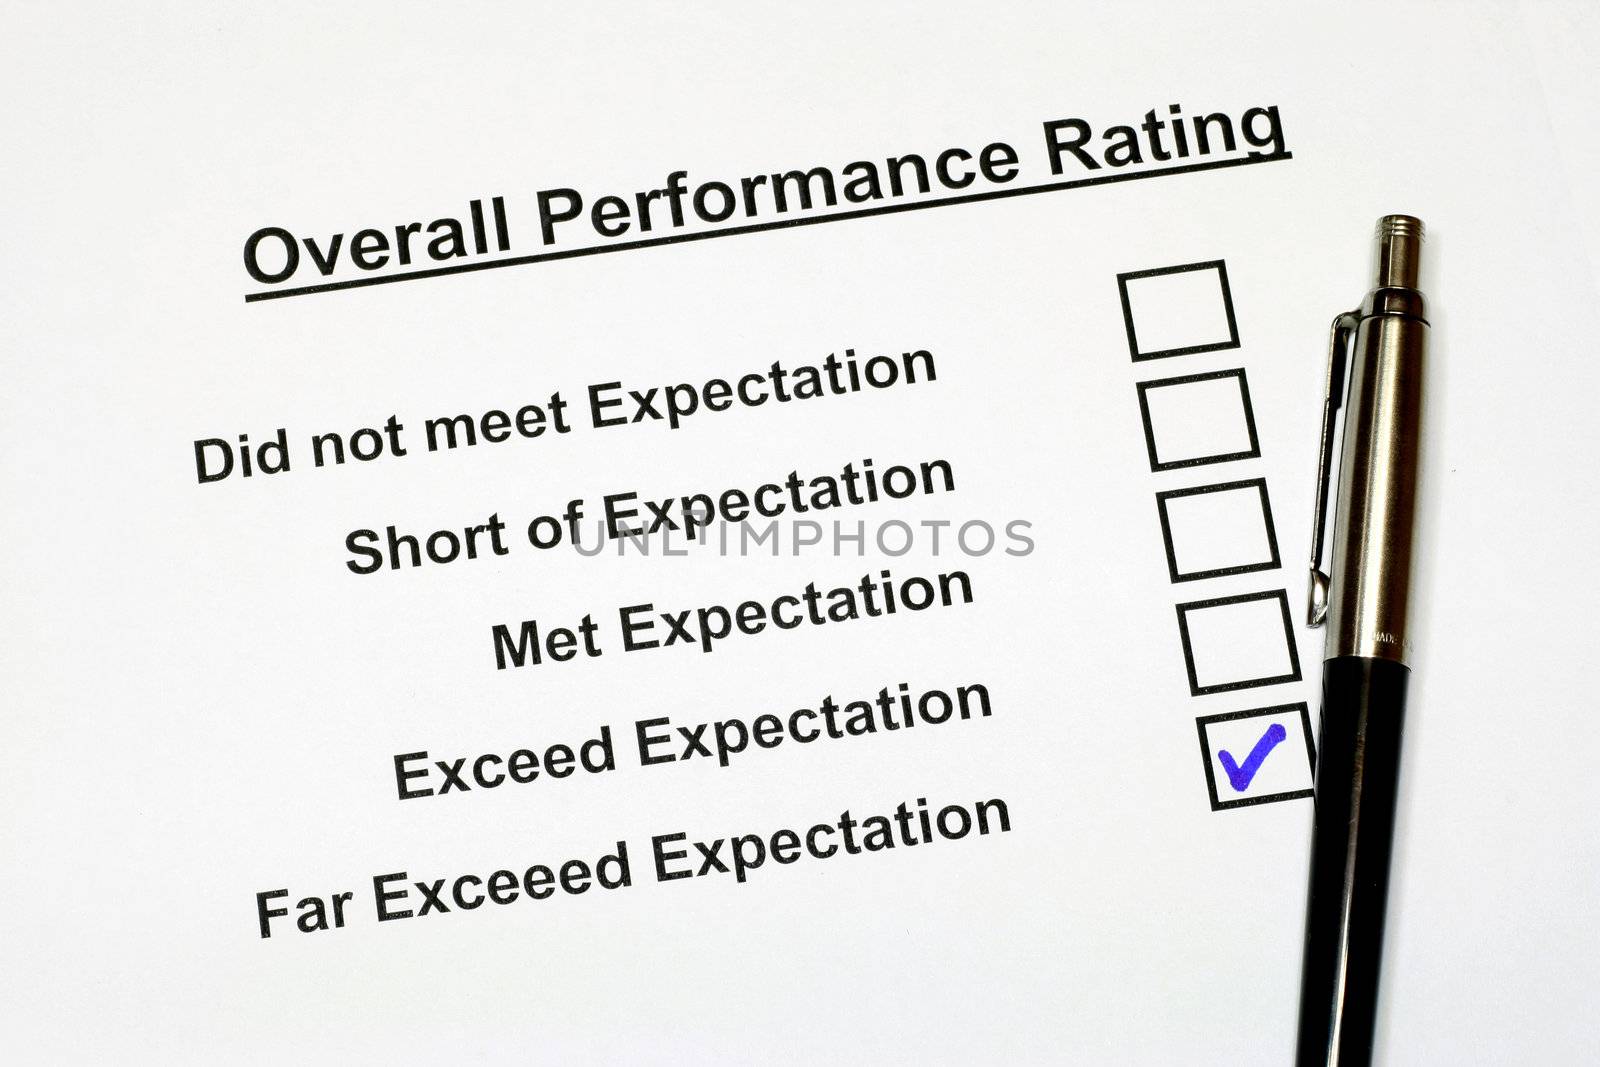 Overall Performance Rating Form 3 by sacatani